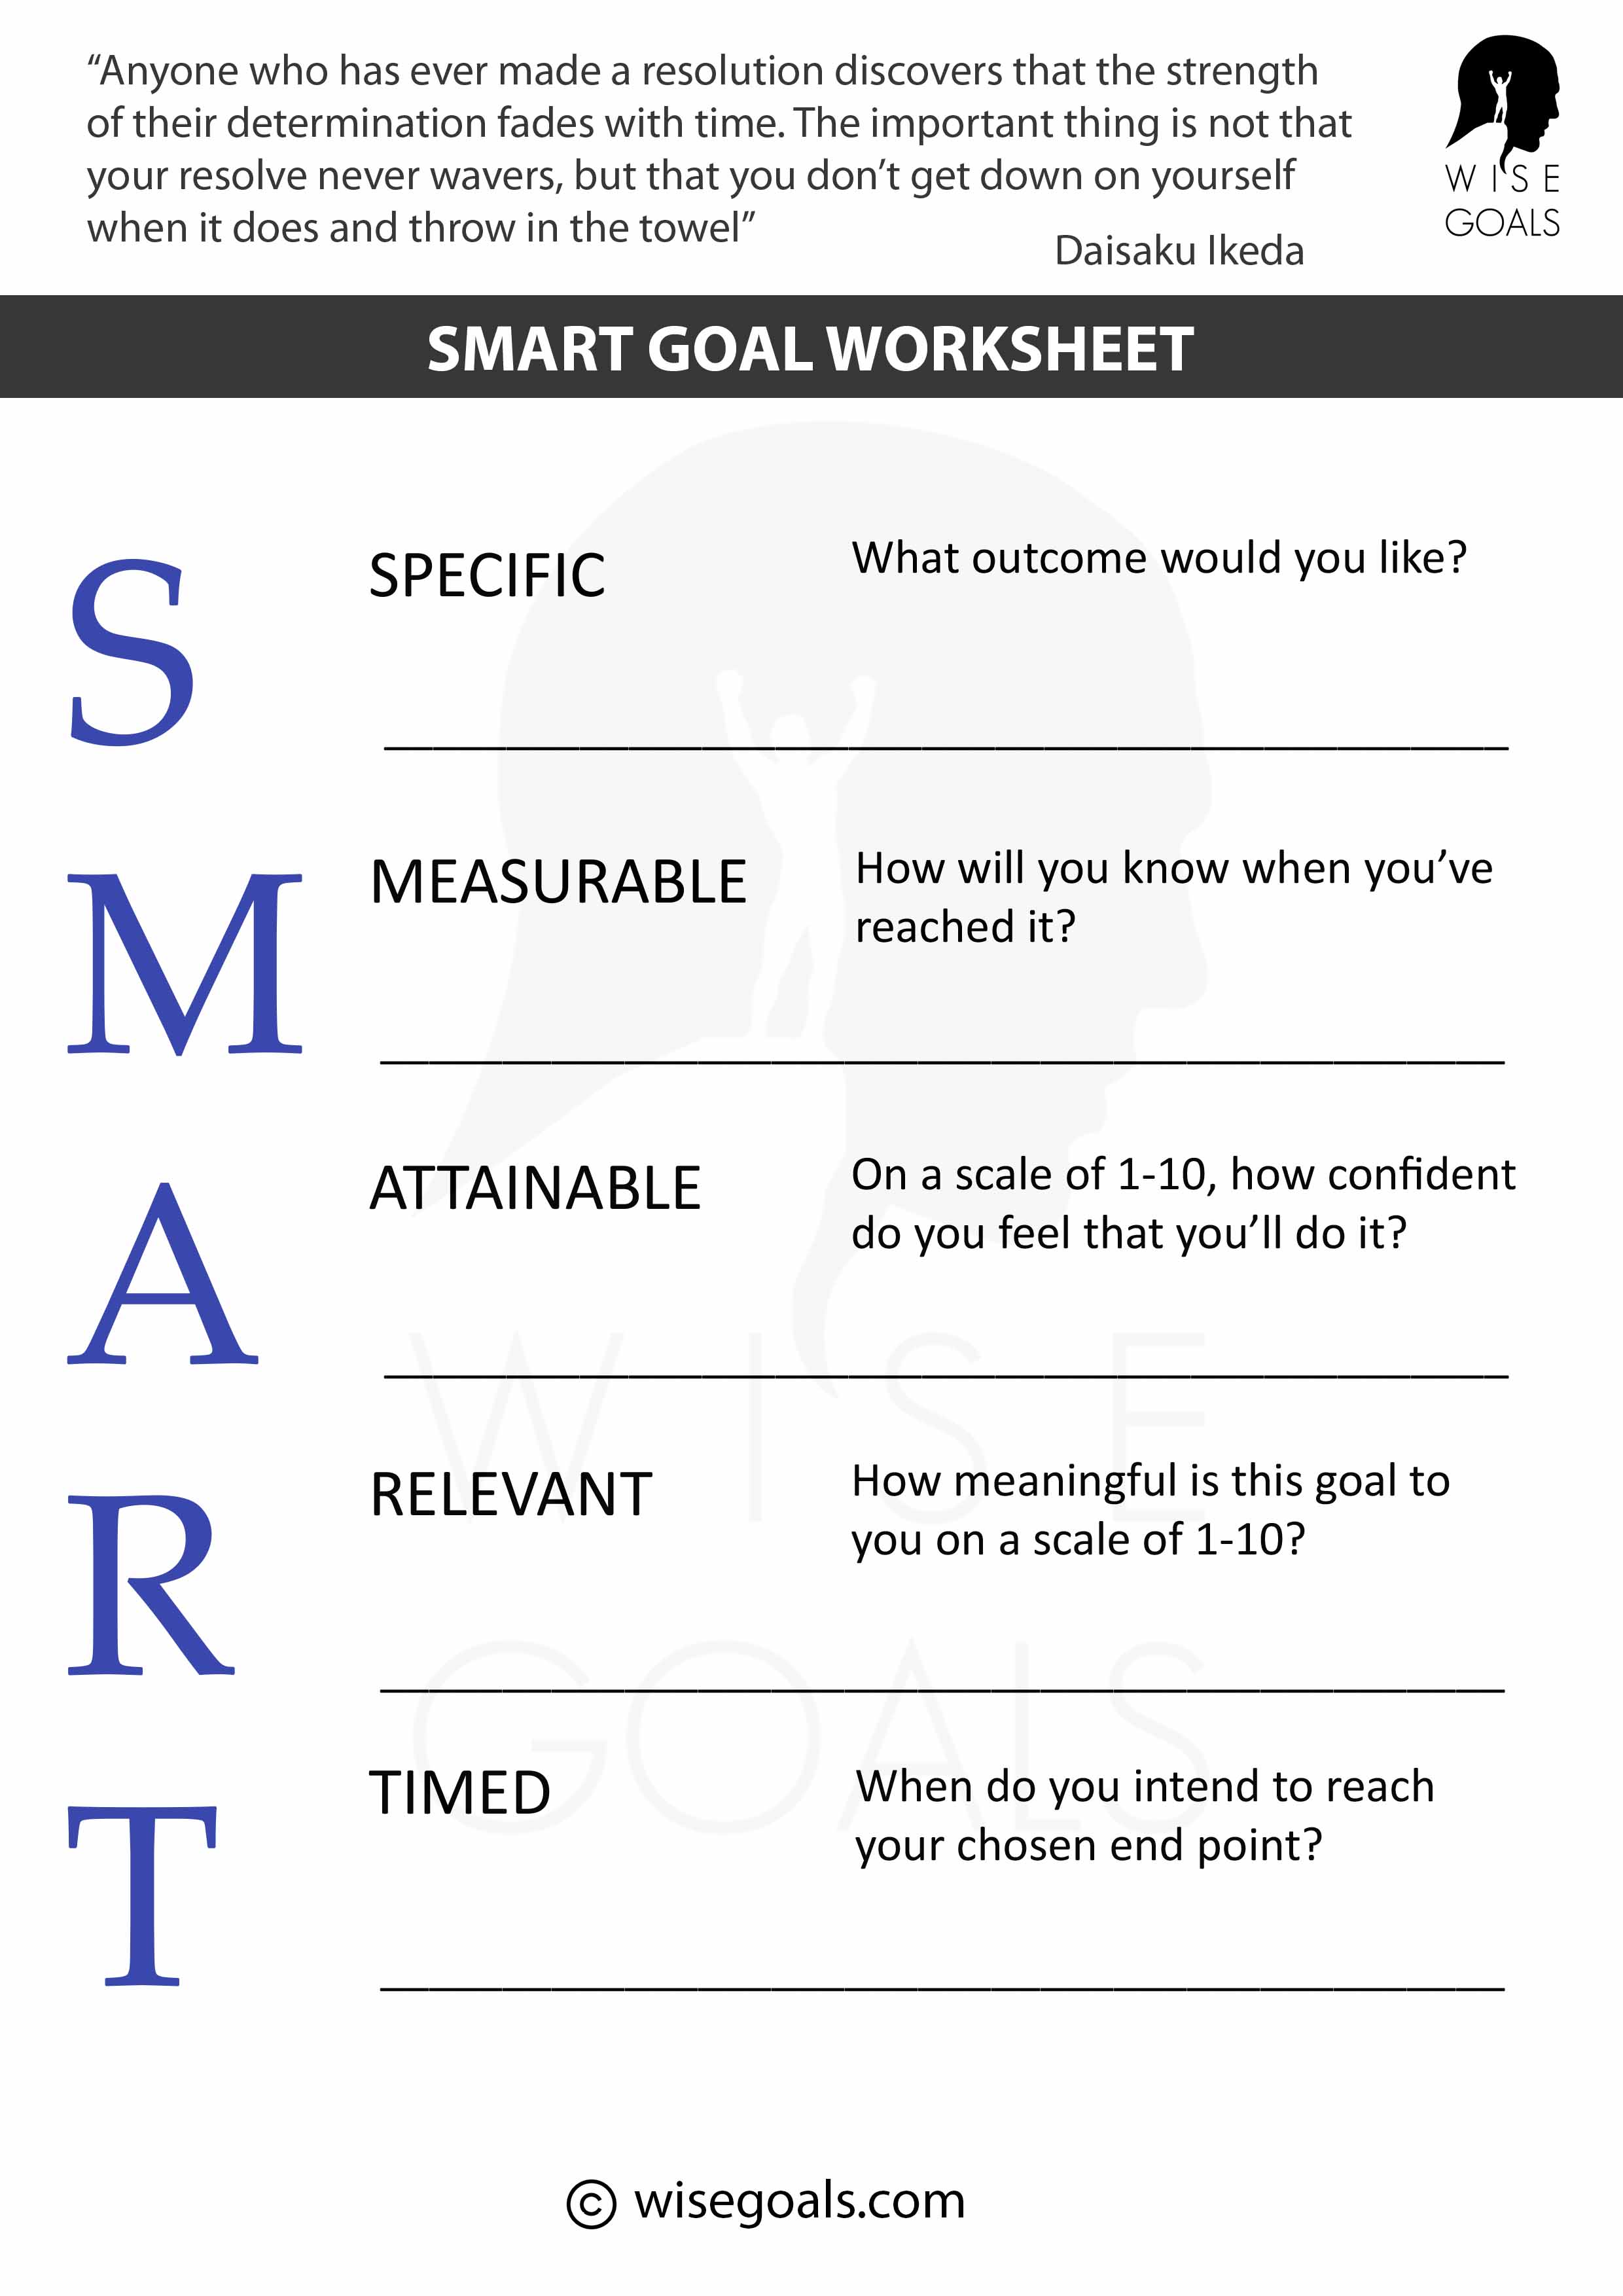 top-quality-smart-goal-worksheet-from-wisegoals